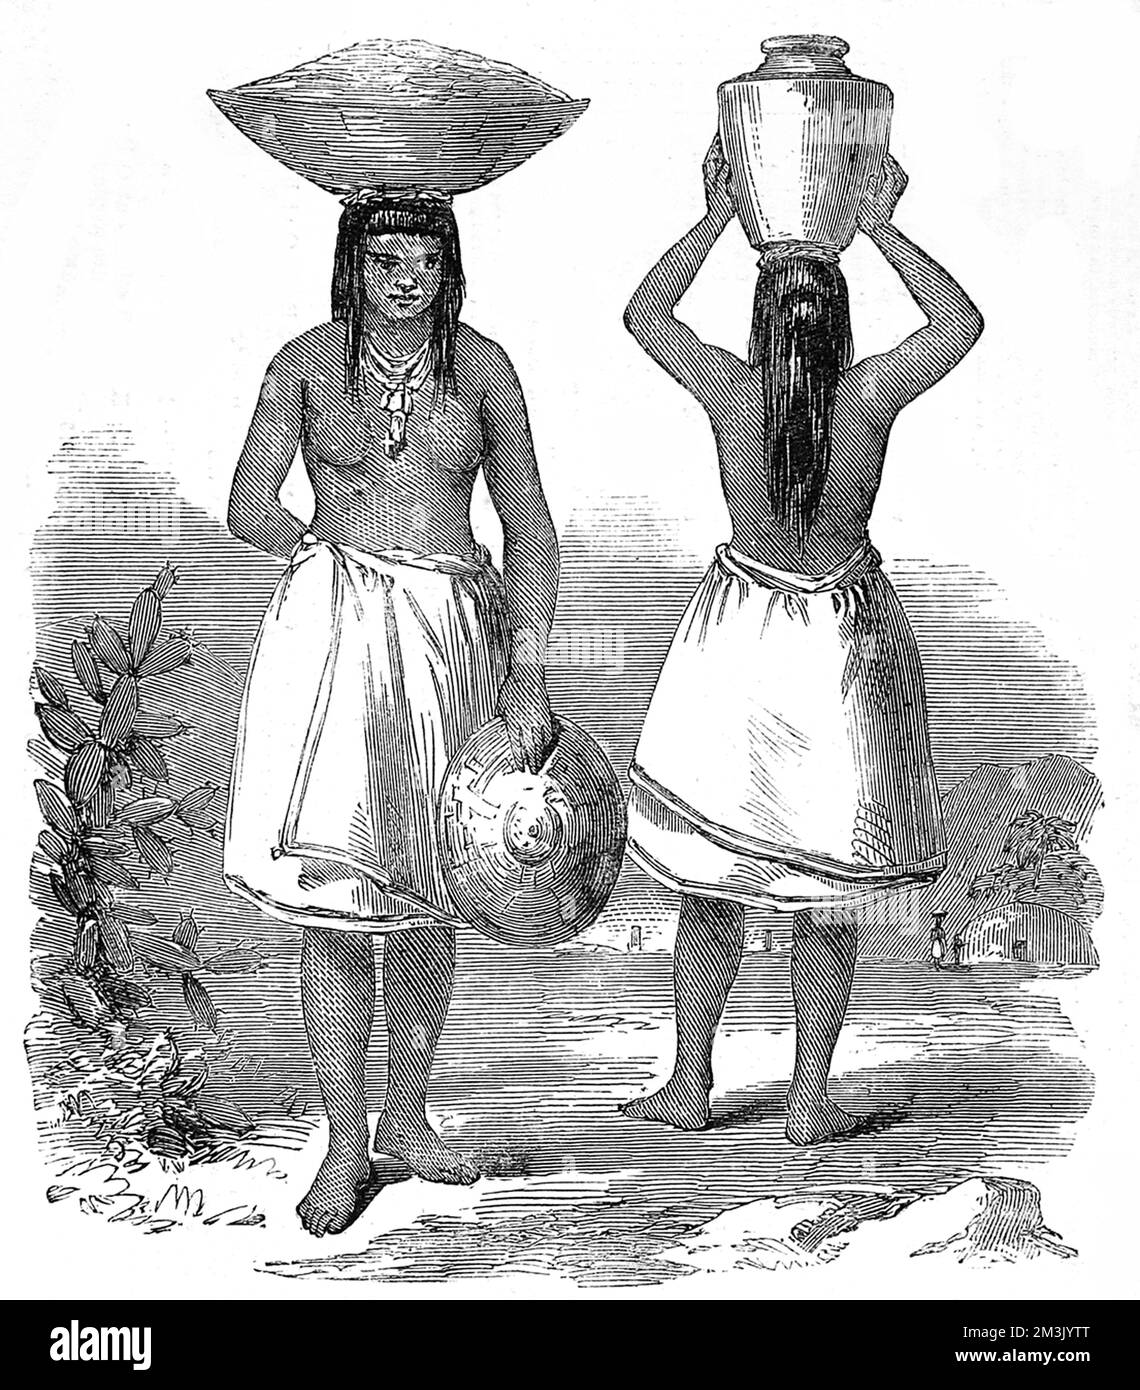 Two native American Indian women of the Pimo tribe carrying baskets and water vessels on their heads, wearing full wrap around skirts and heavy jewellery. Stock Photo